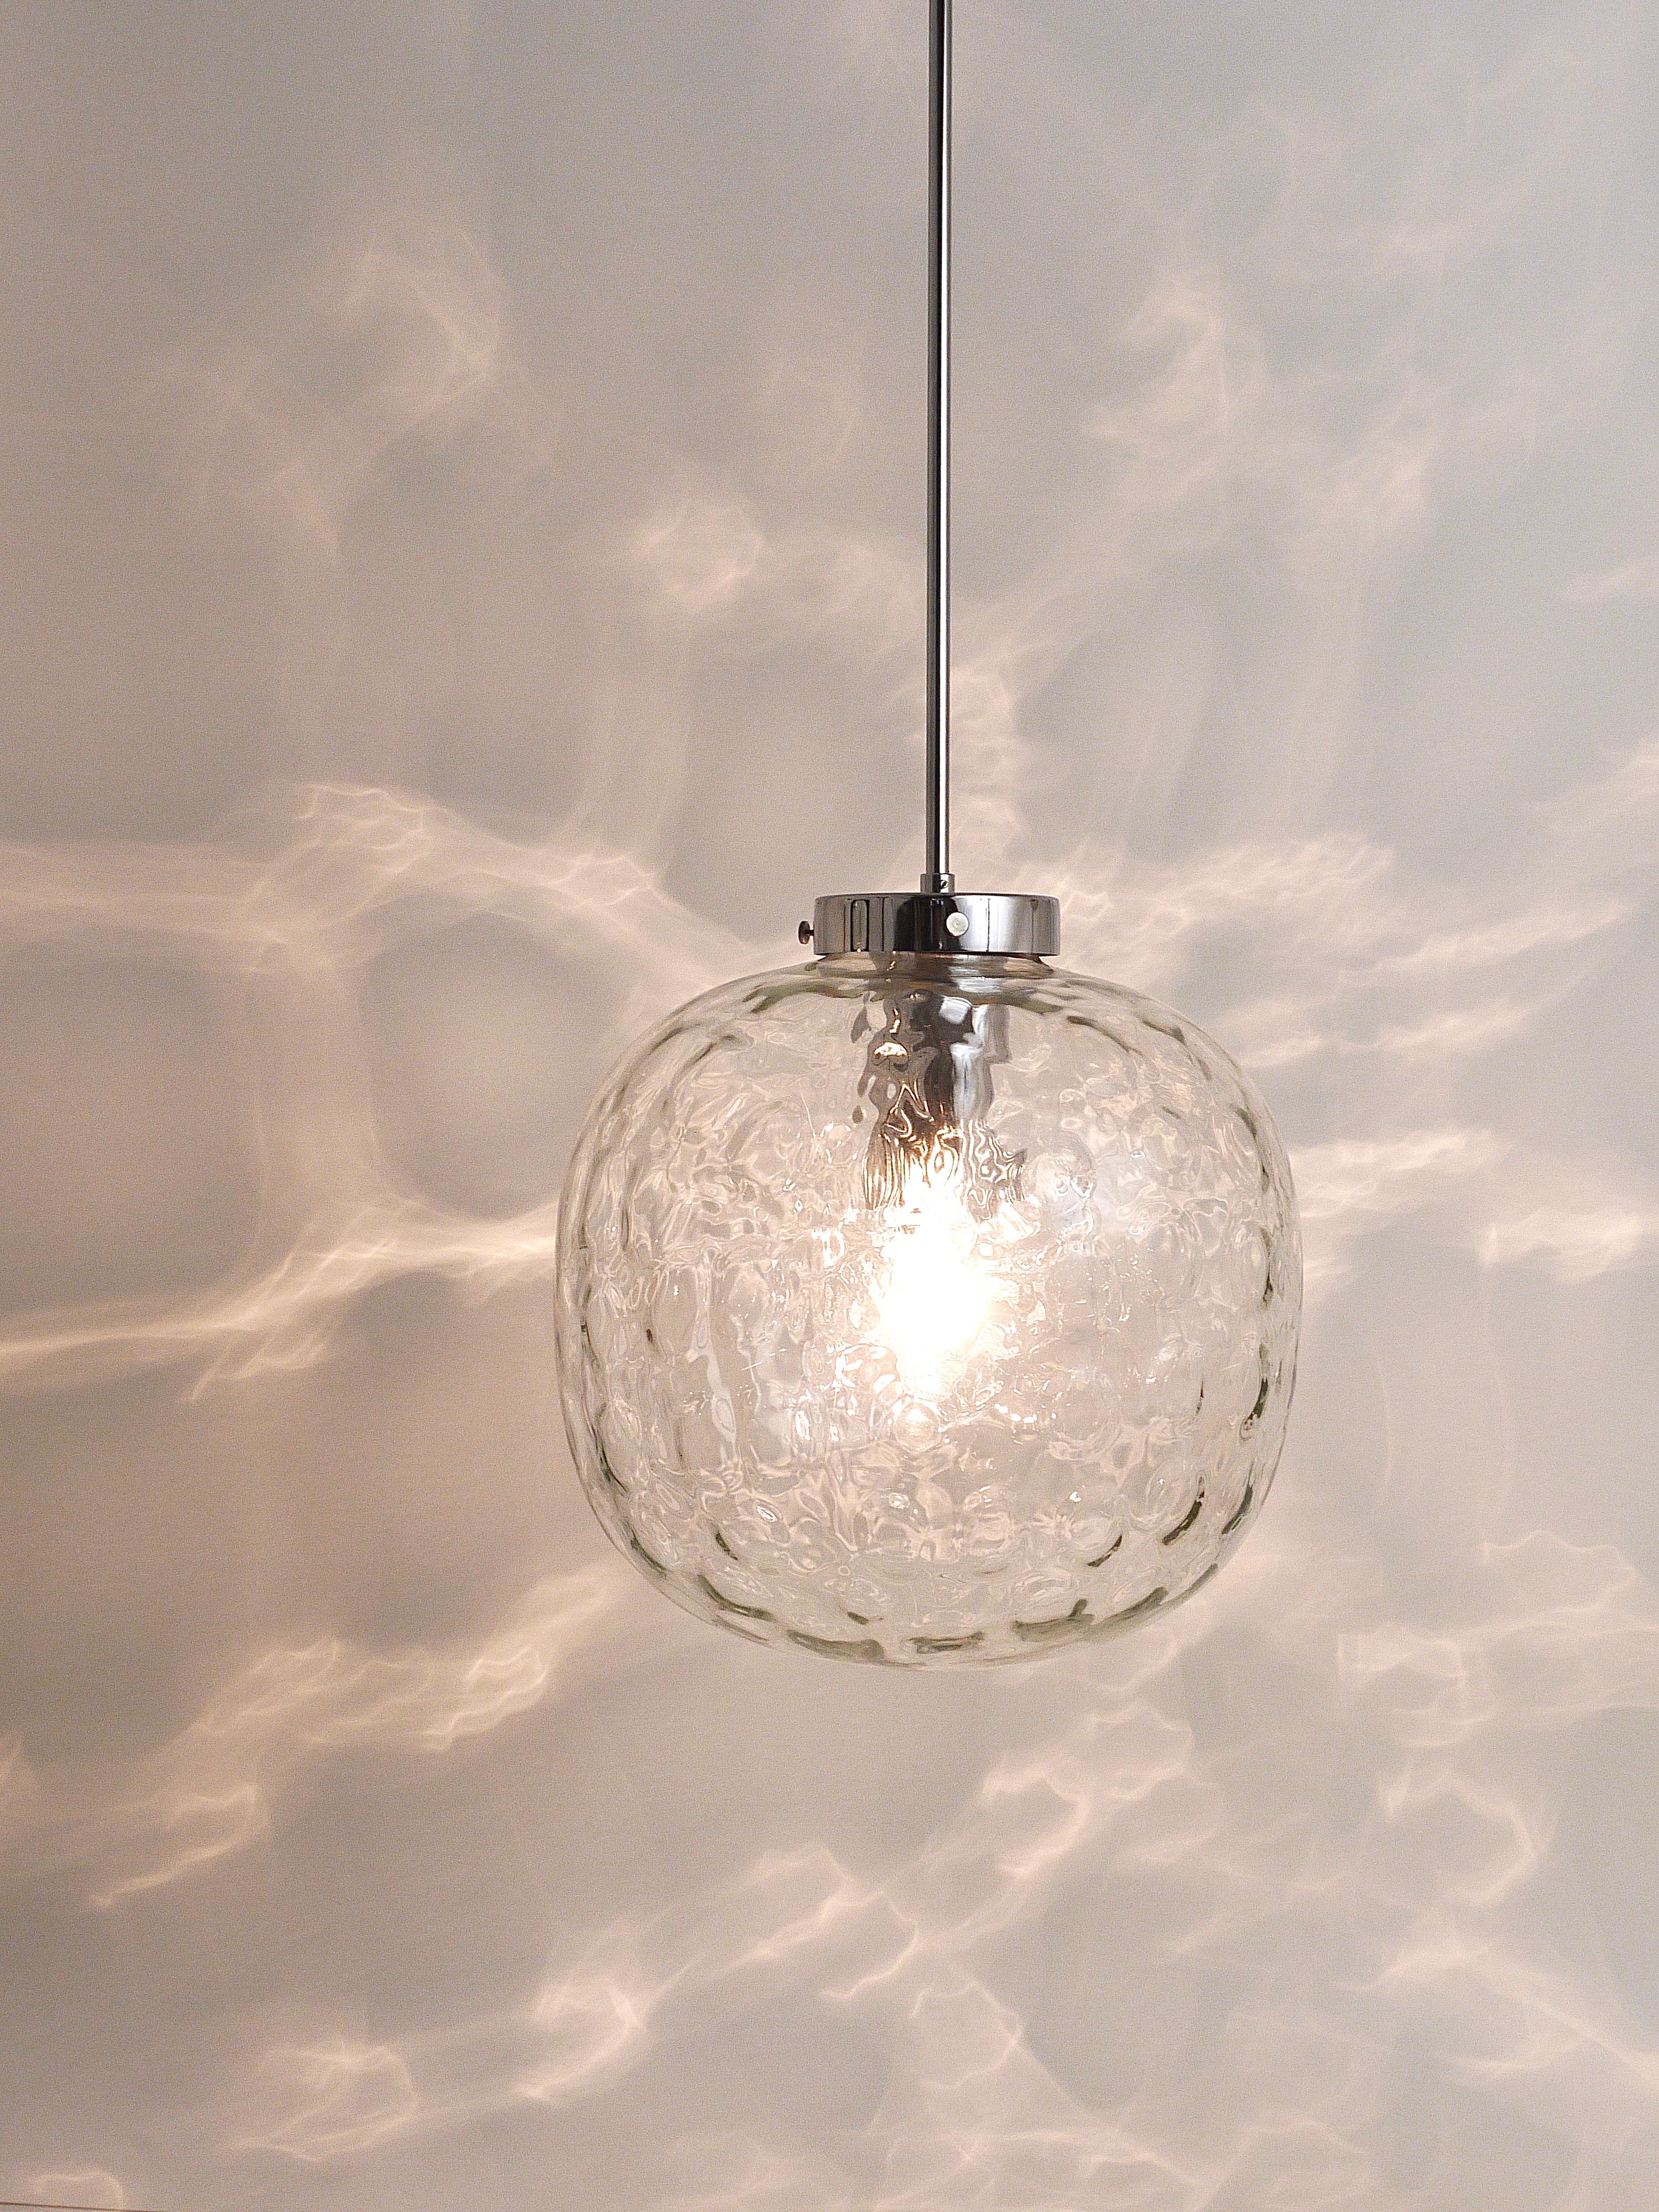 Large Bubble Melting Glass and Chrome Globe Pendant Lamp, Germany, 1970s For Sale 2